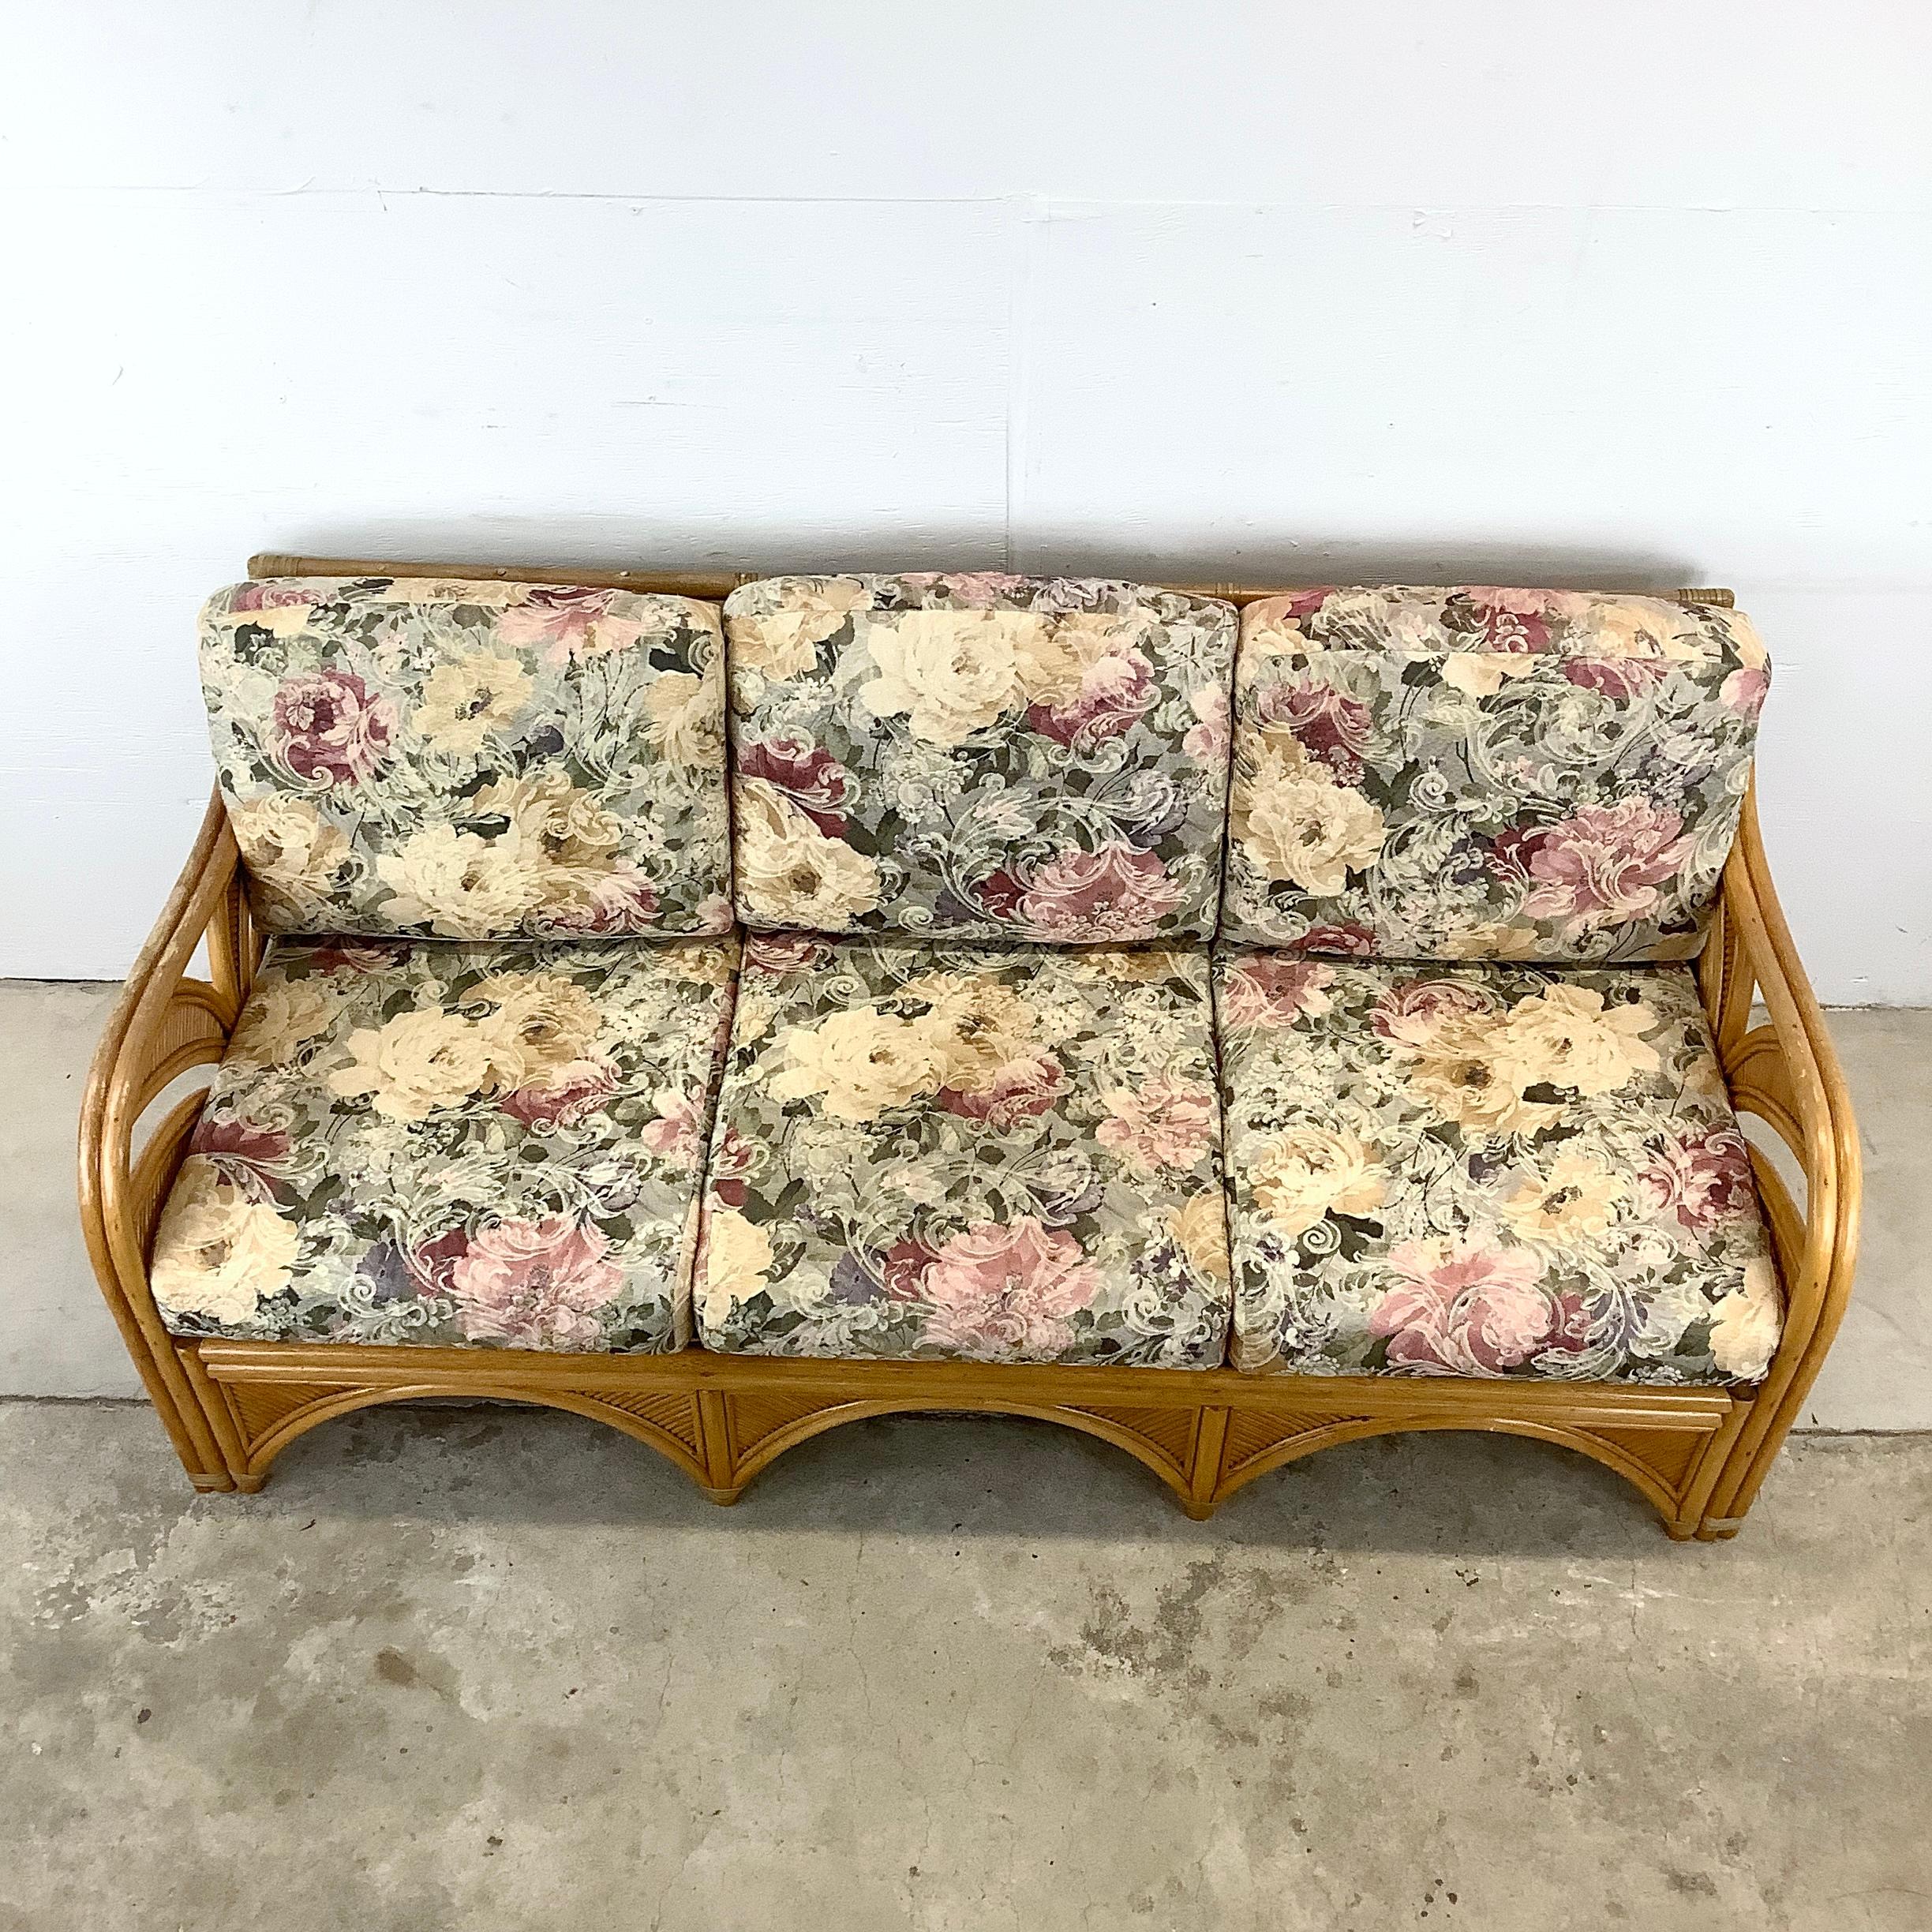 Other Vintage Boho Rattan Sofa With Floral Upholstery